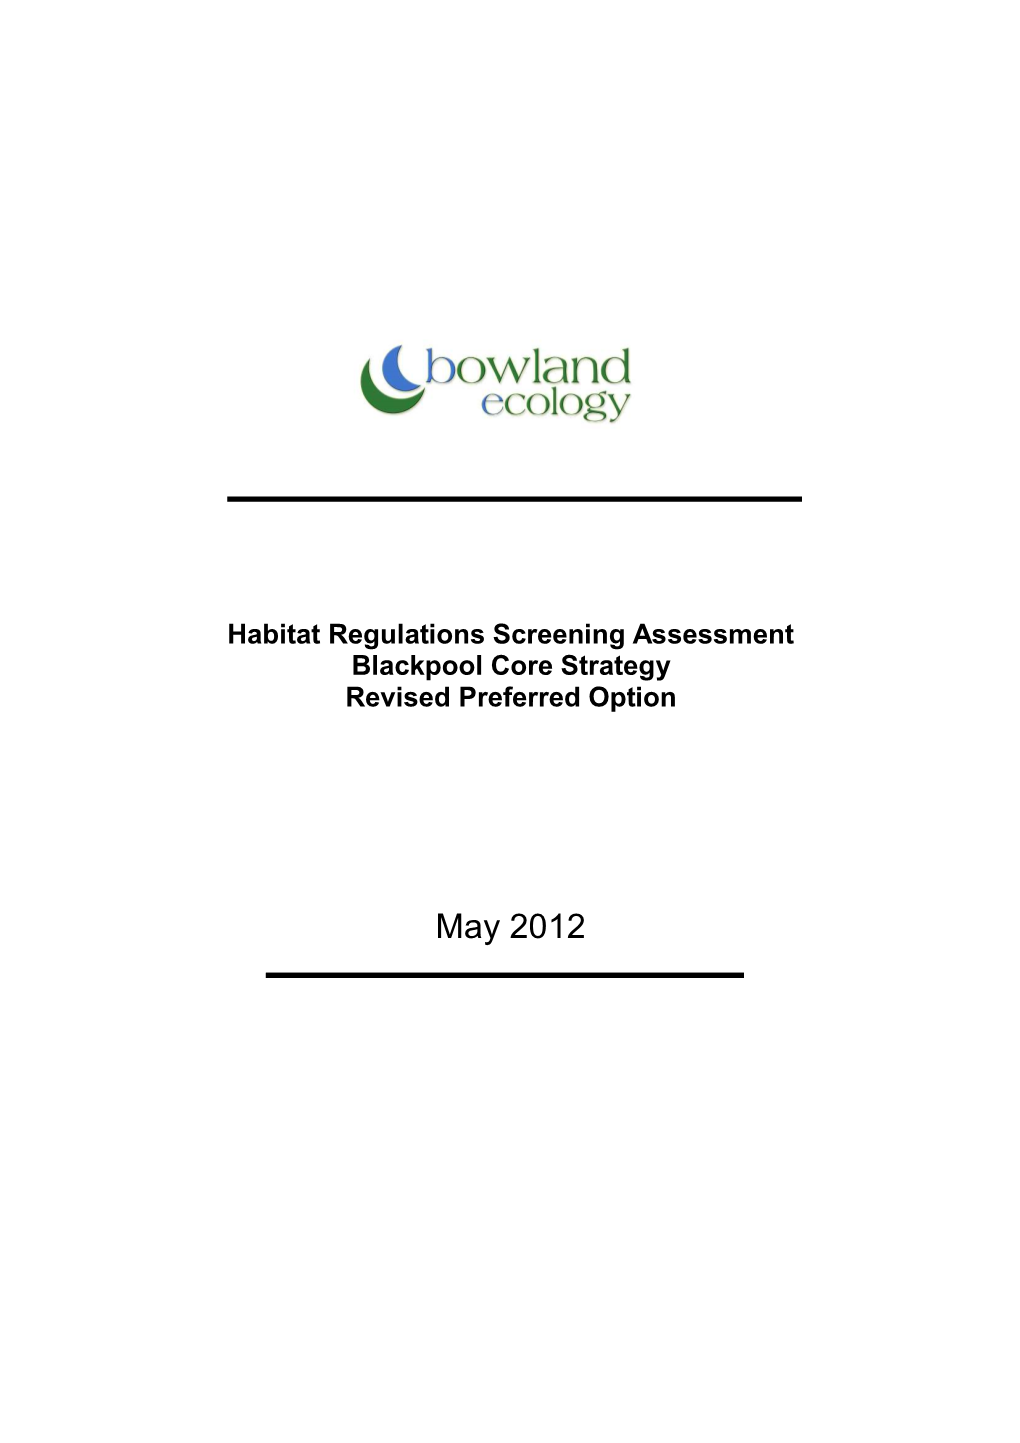 Habitat Regulations Assessment of the Blackpool Core Strategy Revised Preferred Option